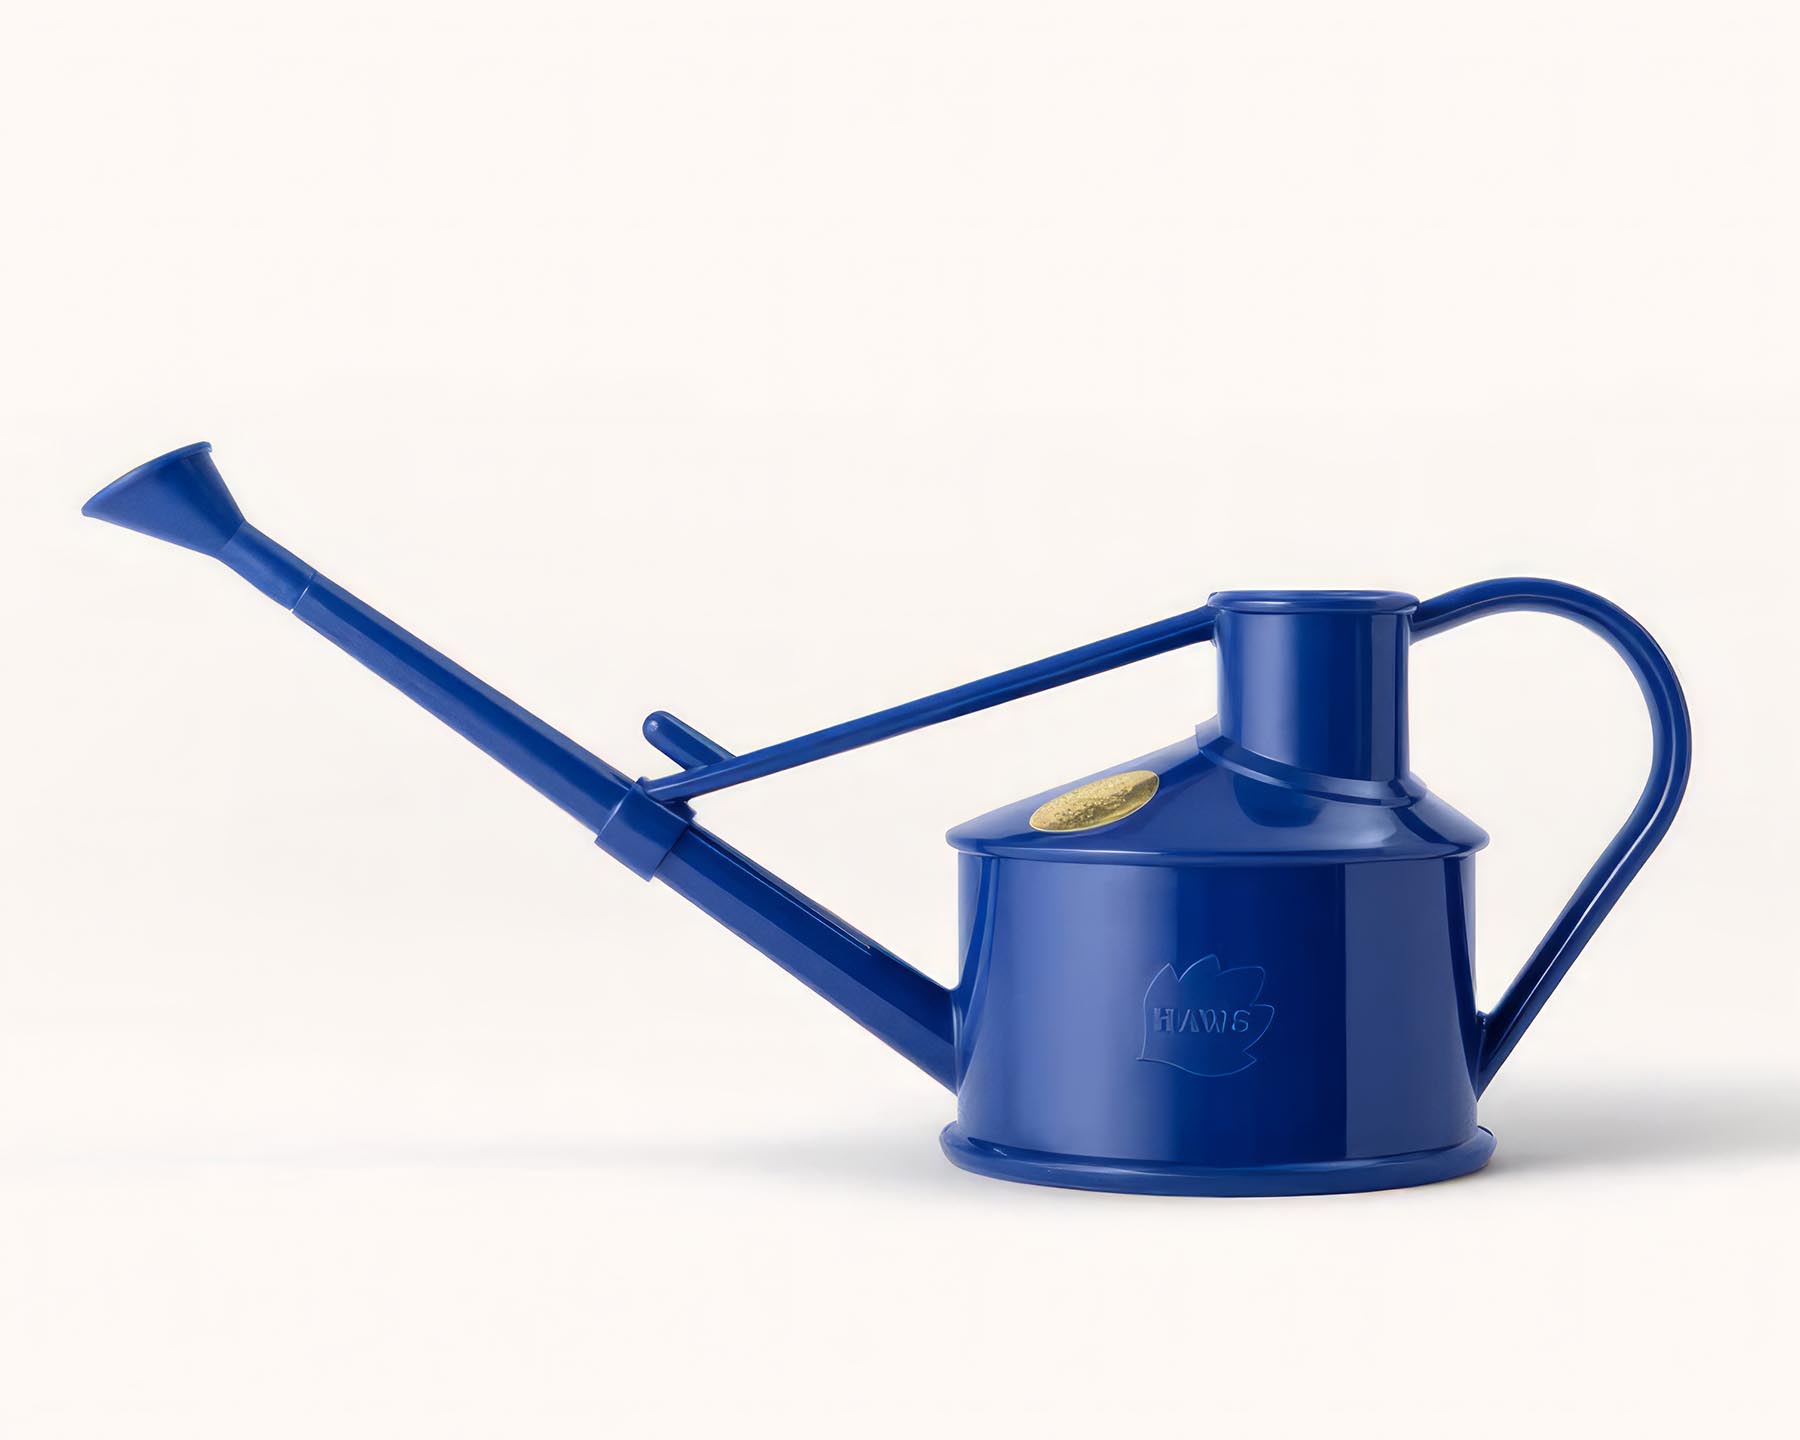 The Langley Sprinkler Watering Can - 500ml by Haws - Blue